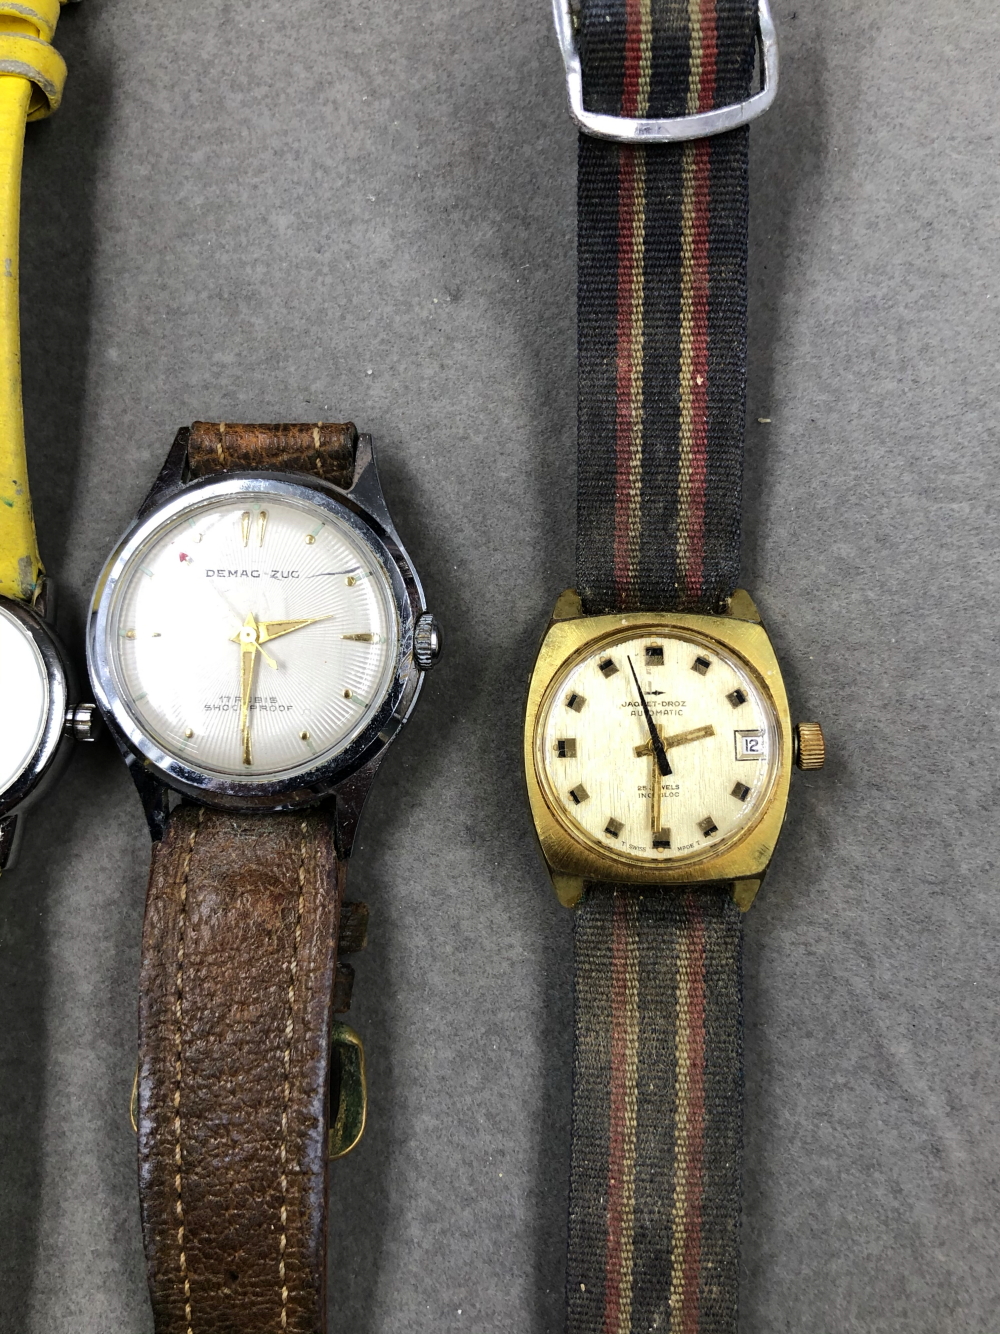 A COLLECTION OF VINTAGE COSTUME JEWELLERY AND WATCHES TO INCLUDE DEMAG-ZUG, JAQUET-DROZ, TIMEX, - Image 7 of 7